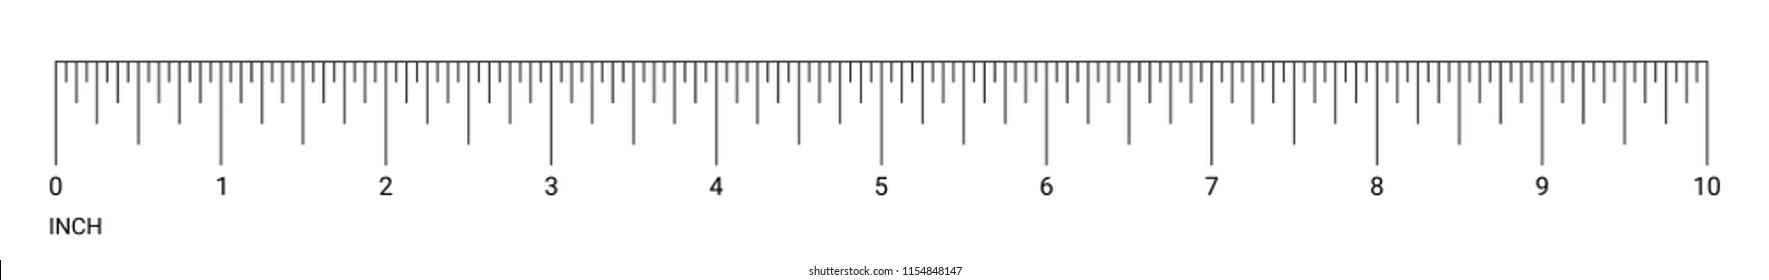 10 Inches Ruler Measurement Tool With Numbers Scale. Vector 10 In Actual Size Inch Chart With Detailed Grid System